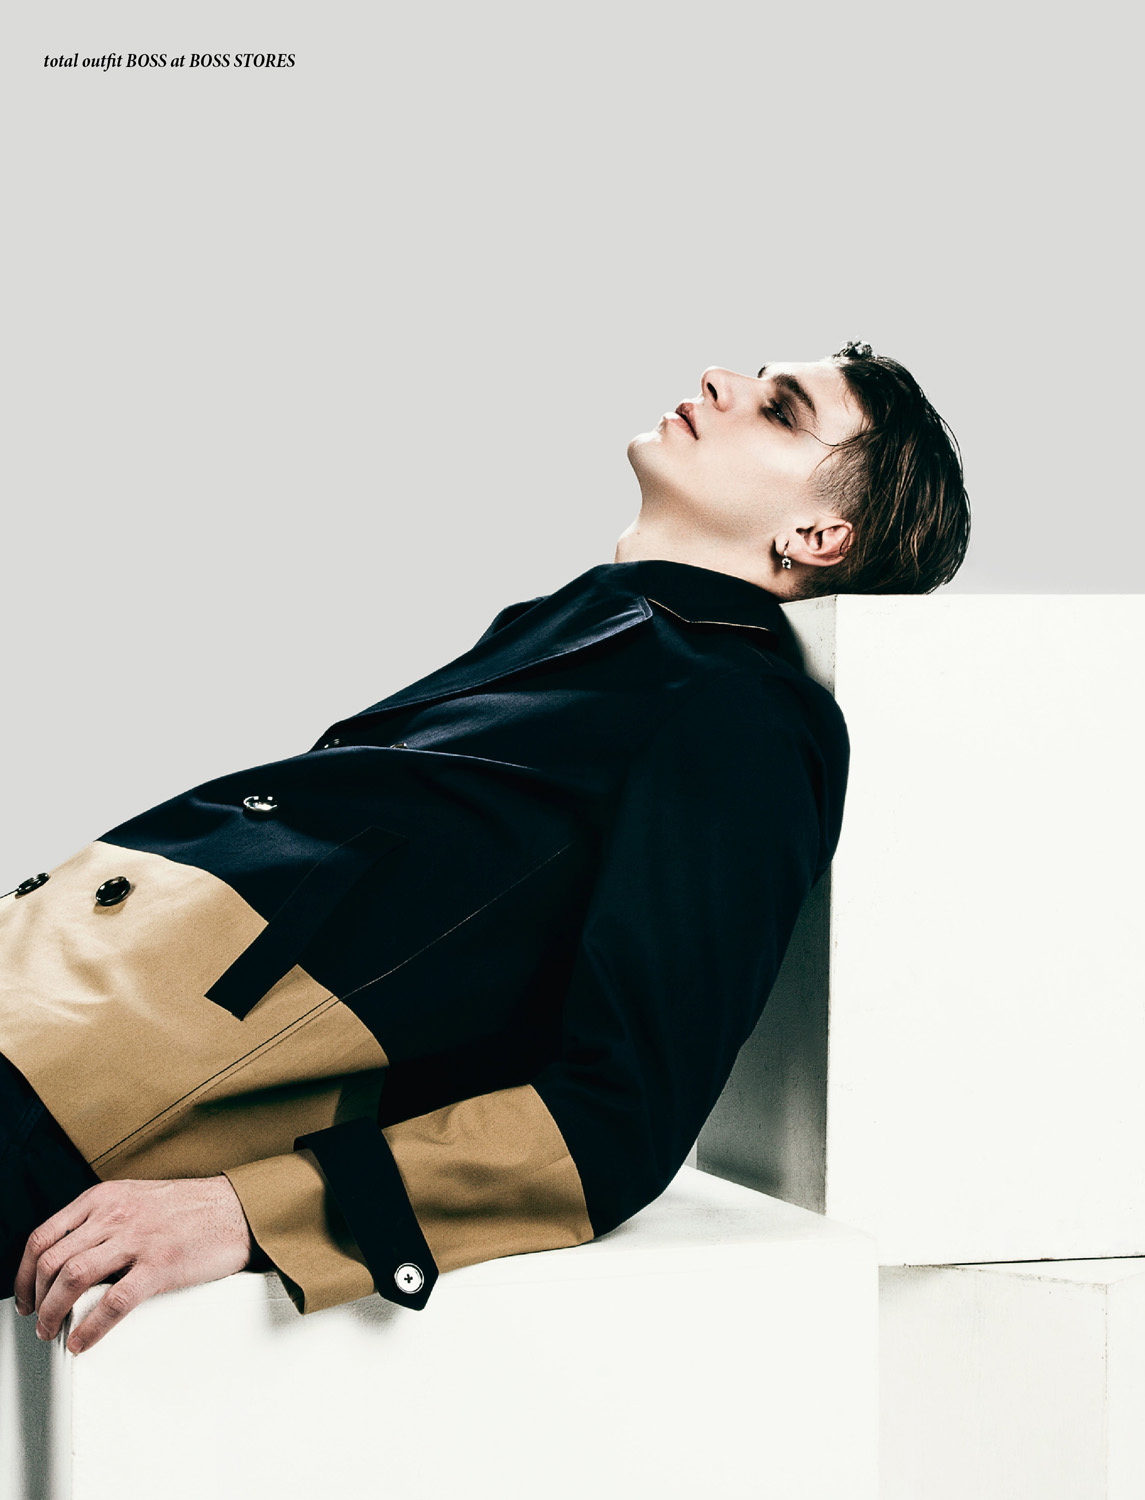 Steve Milatos By Joey Leo For Chasseur Magazine Issue 10 Chasseur